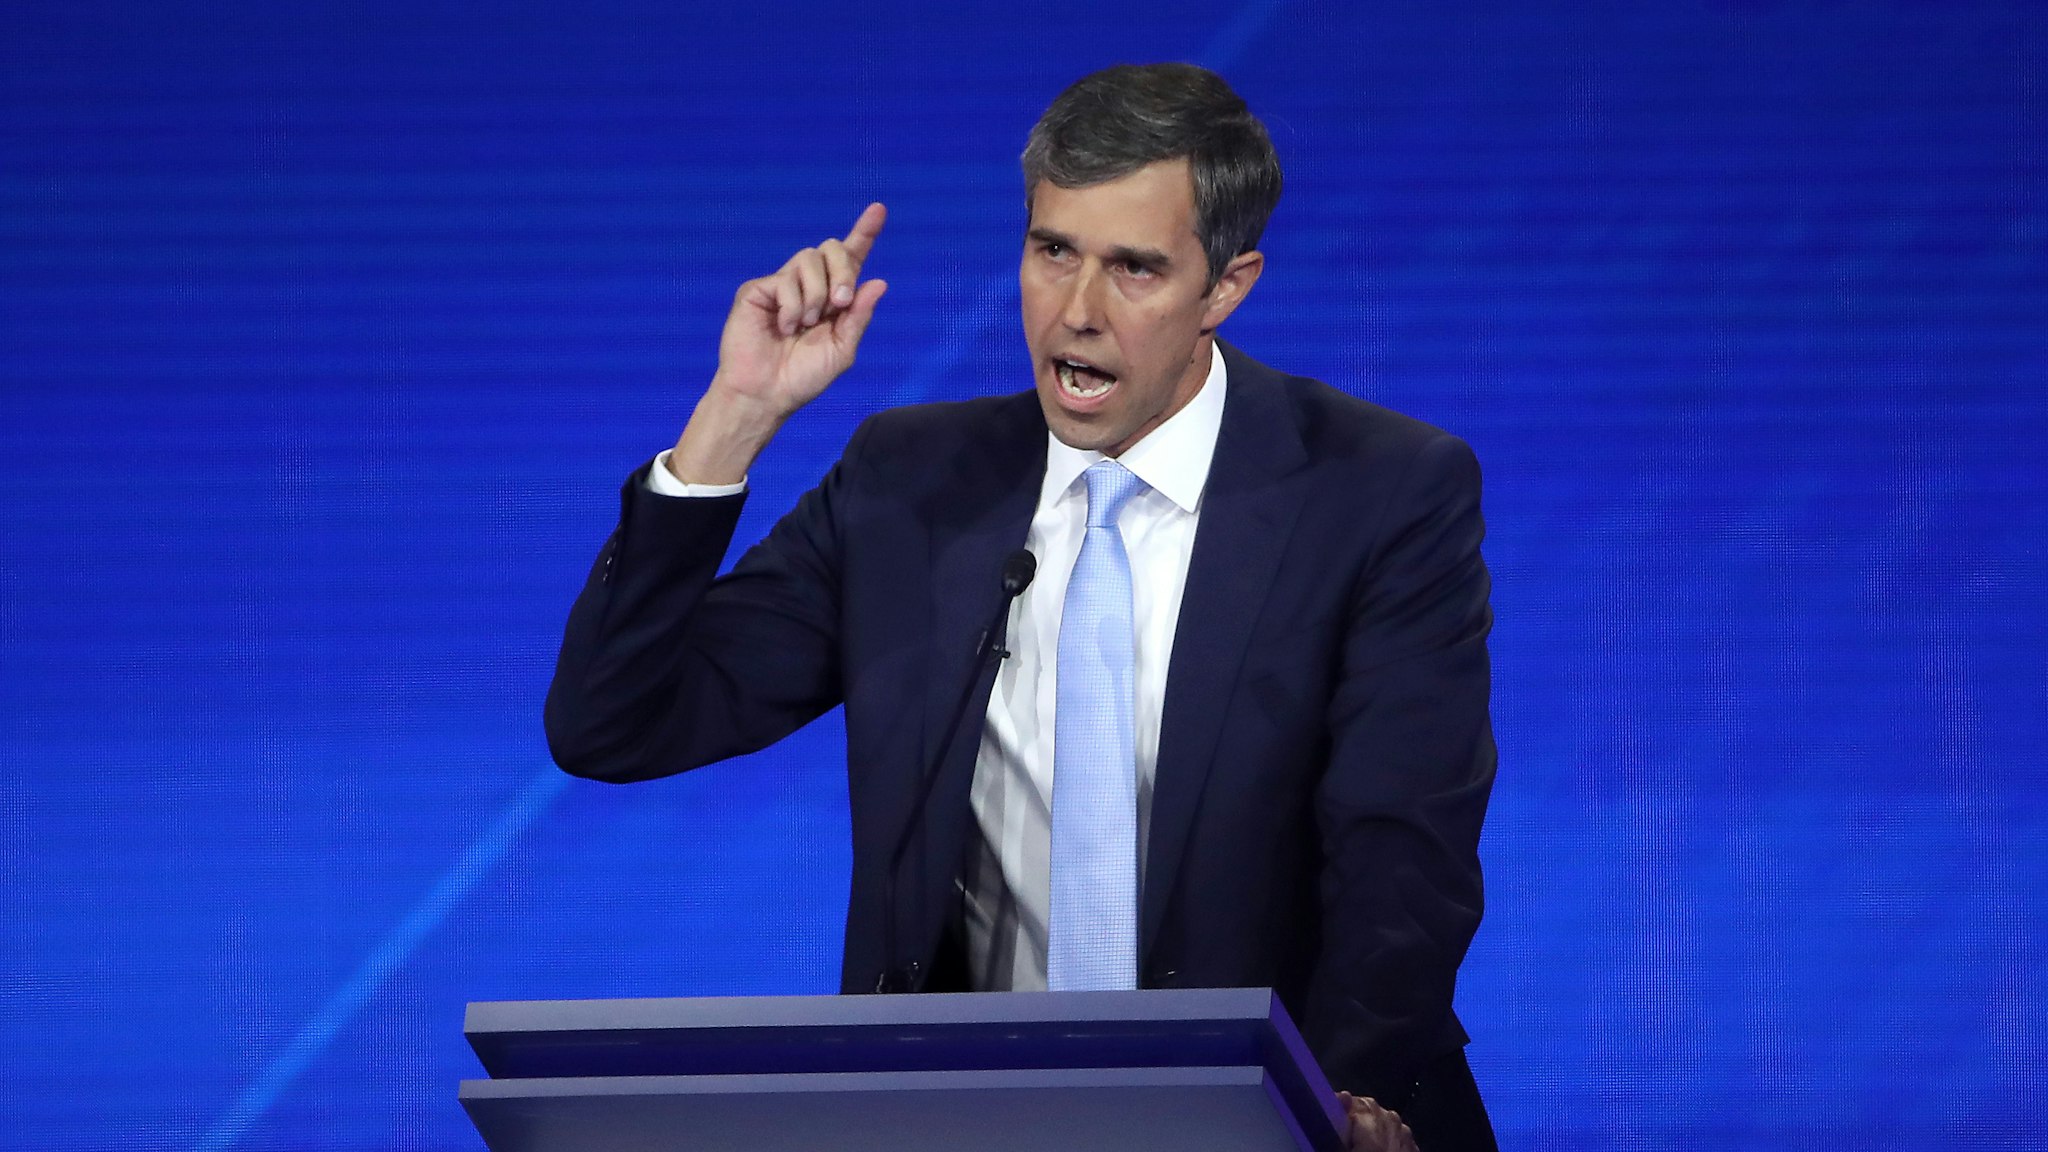 Democratic presidential candidate former Texas congressman Beto O'Rourke speaks during the Democratic Presidential Debate at Texas Southern University's Health and PE Center on September 12, 2019 in Houston, Texas. Ten Democratic presidential hopefuls were chosen from the larger field of candidates to participate in the debate hosted by ABC News in partnership with Univision.